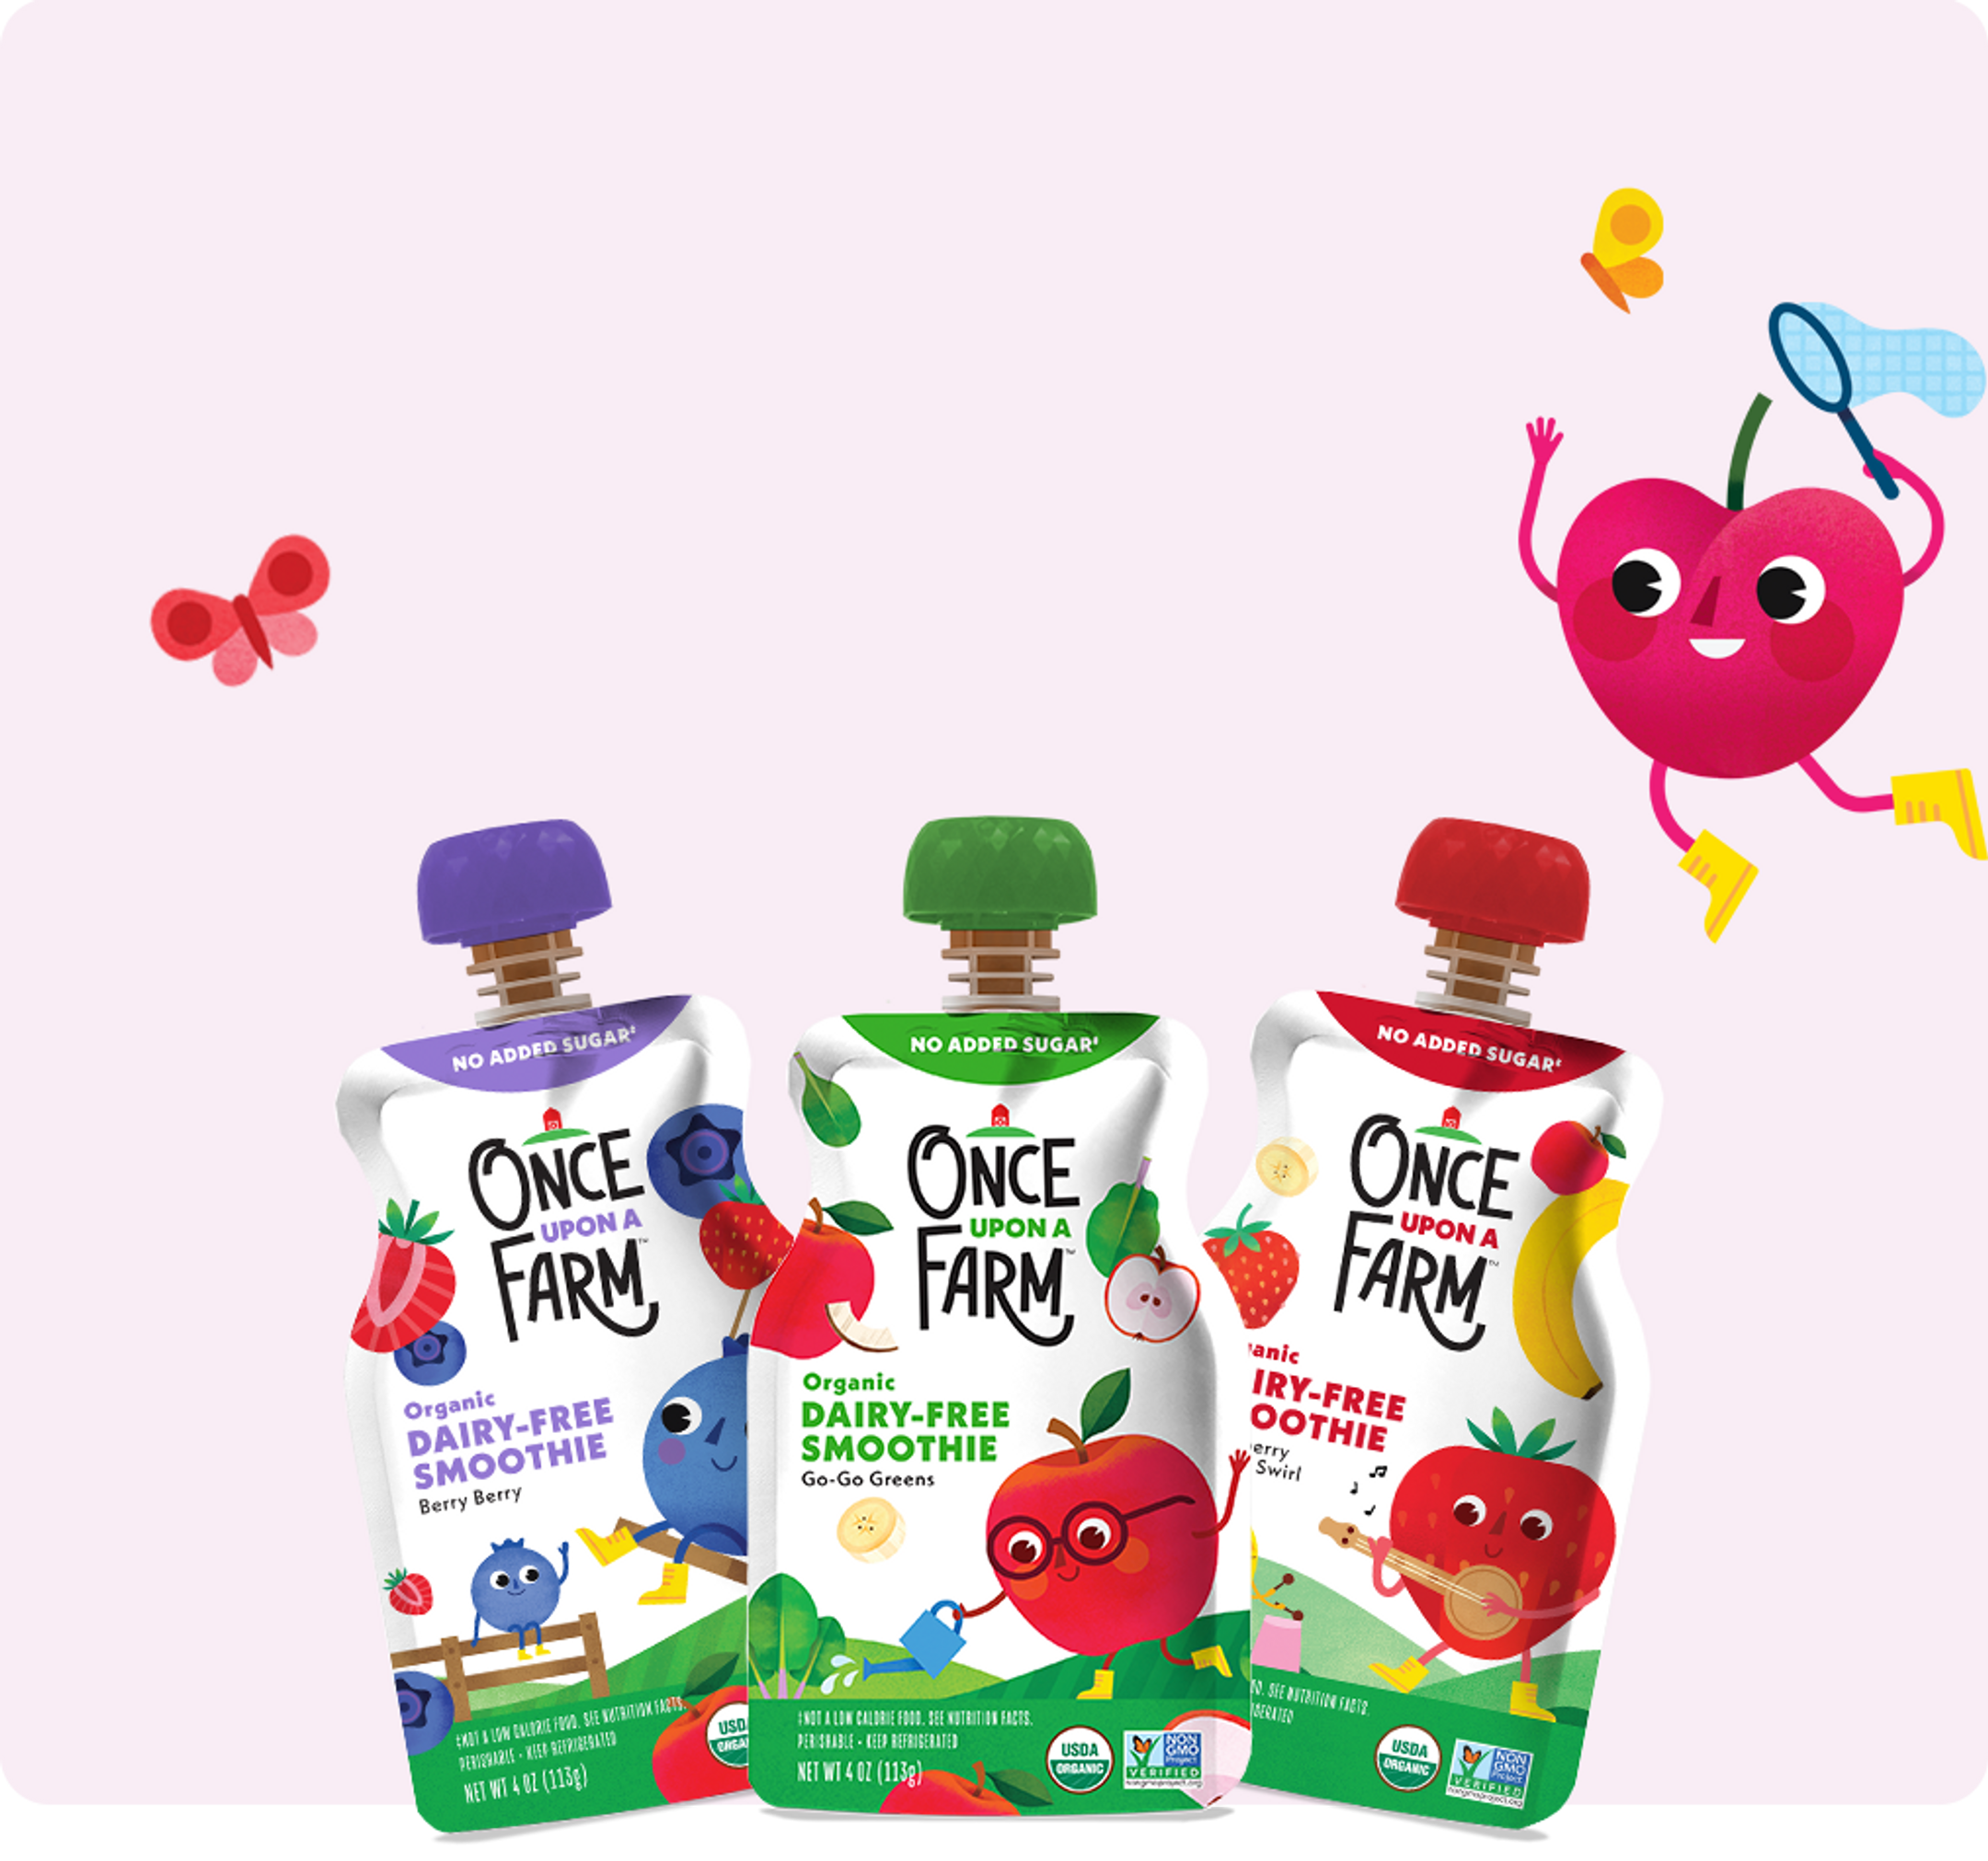 Berry Berry, Gogo Greens and Strawberry Banana Swirl Dairy-free Smoothies with illustrated characters 